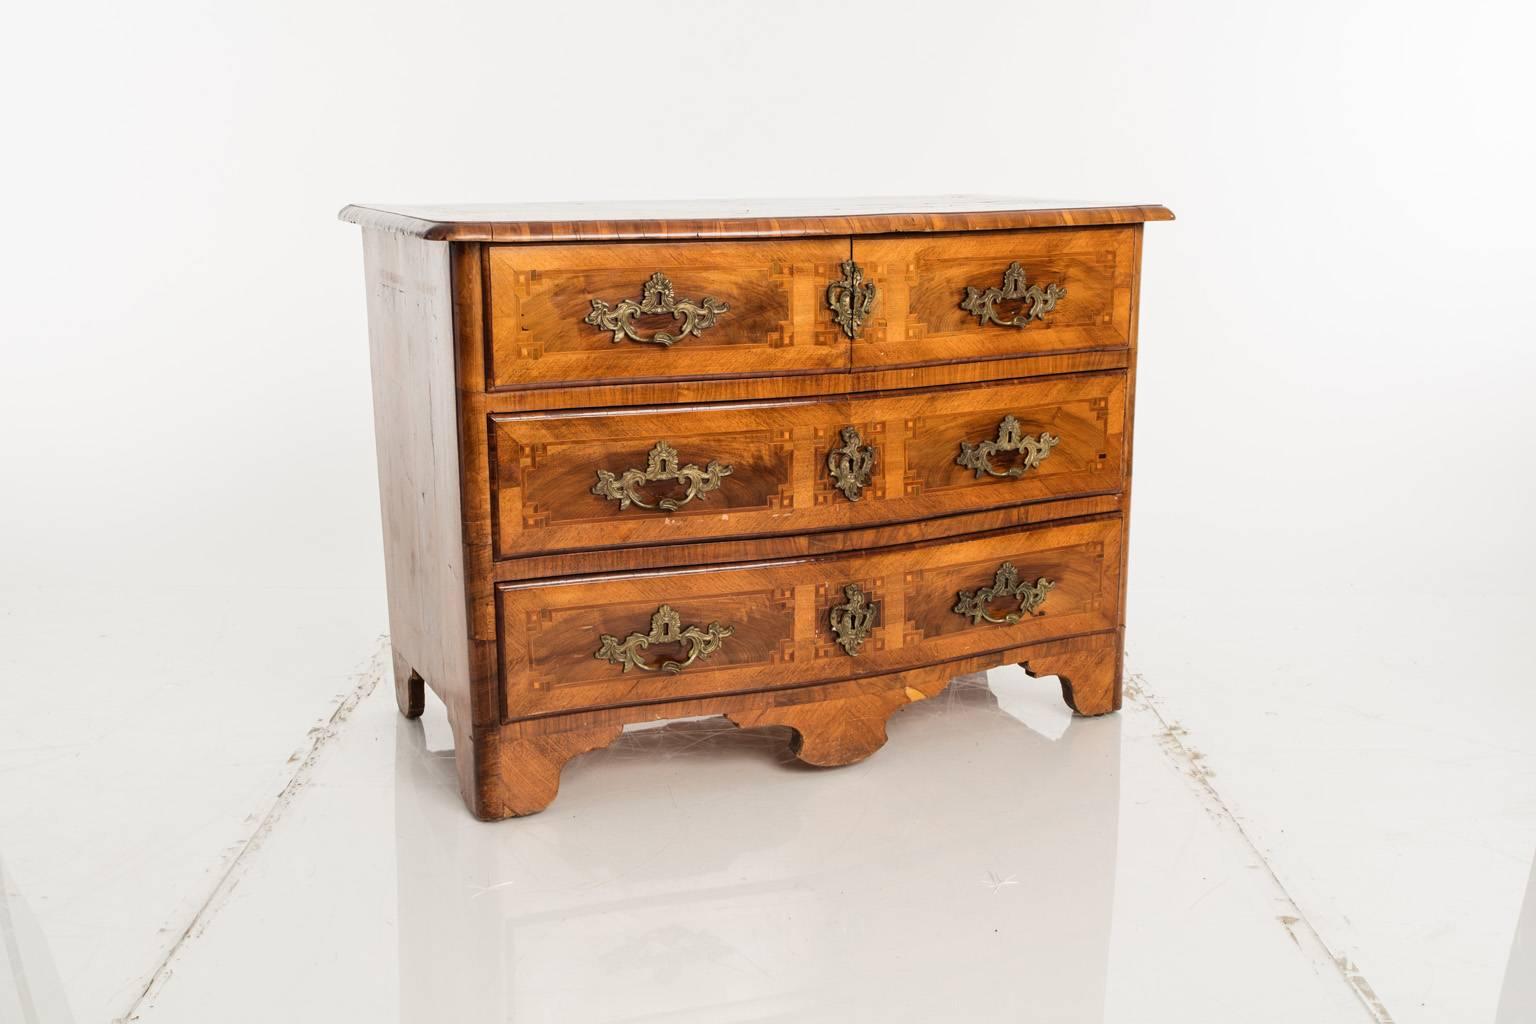 Three drawer walnut chest with a serpentine front and burl walnut inlay.